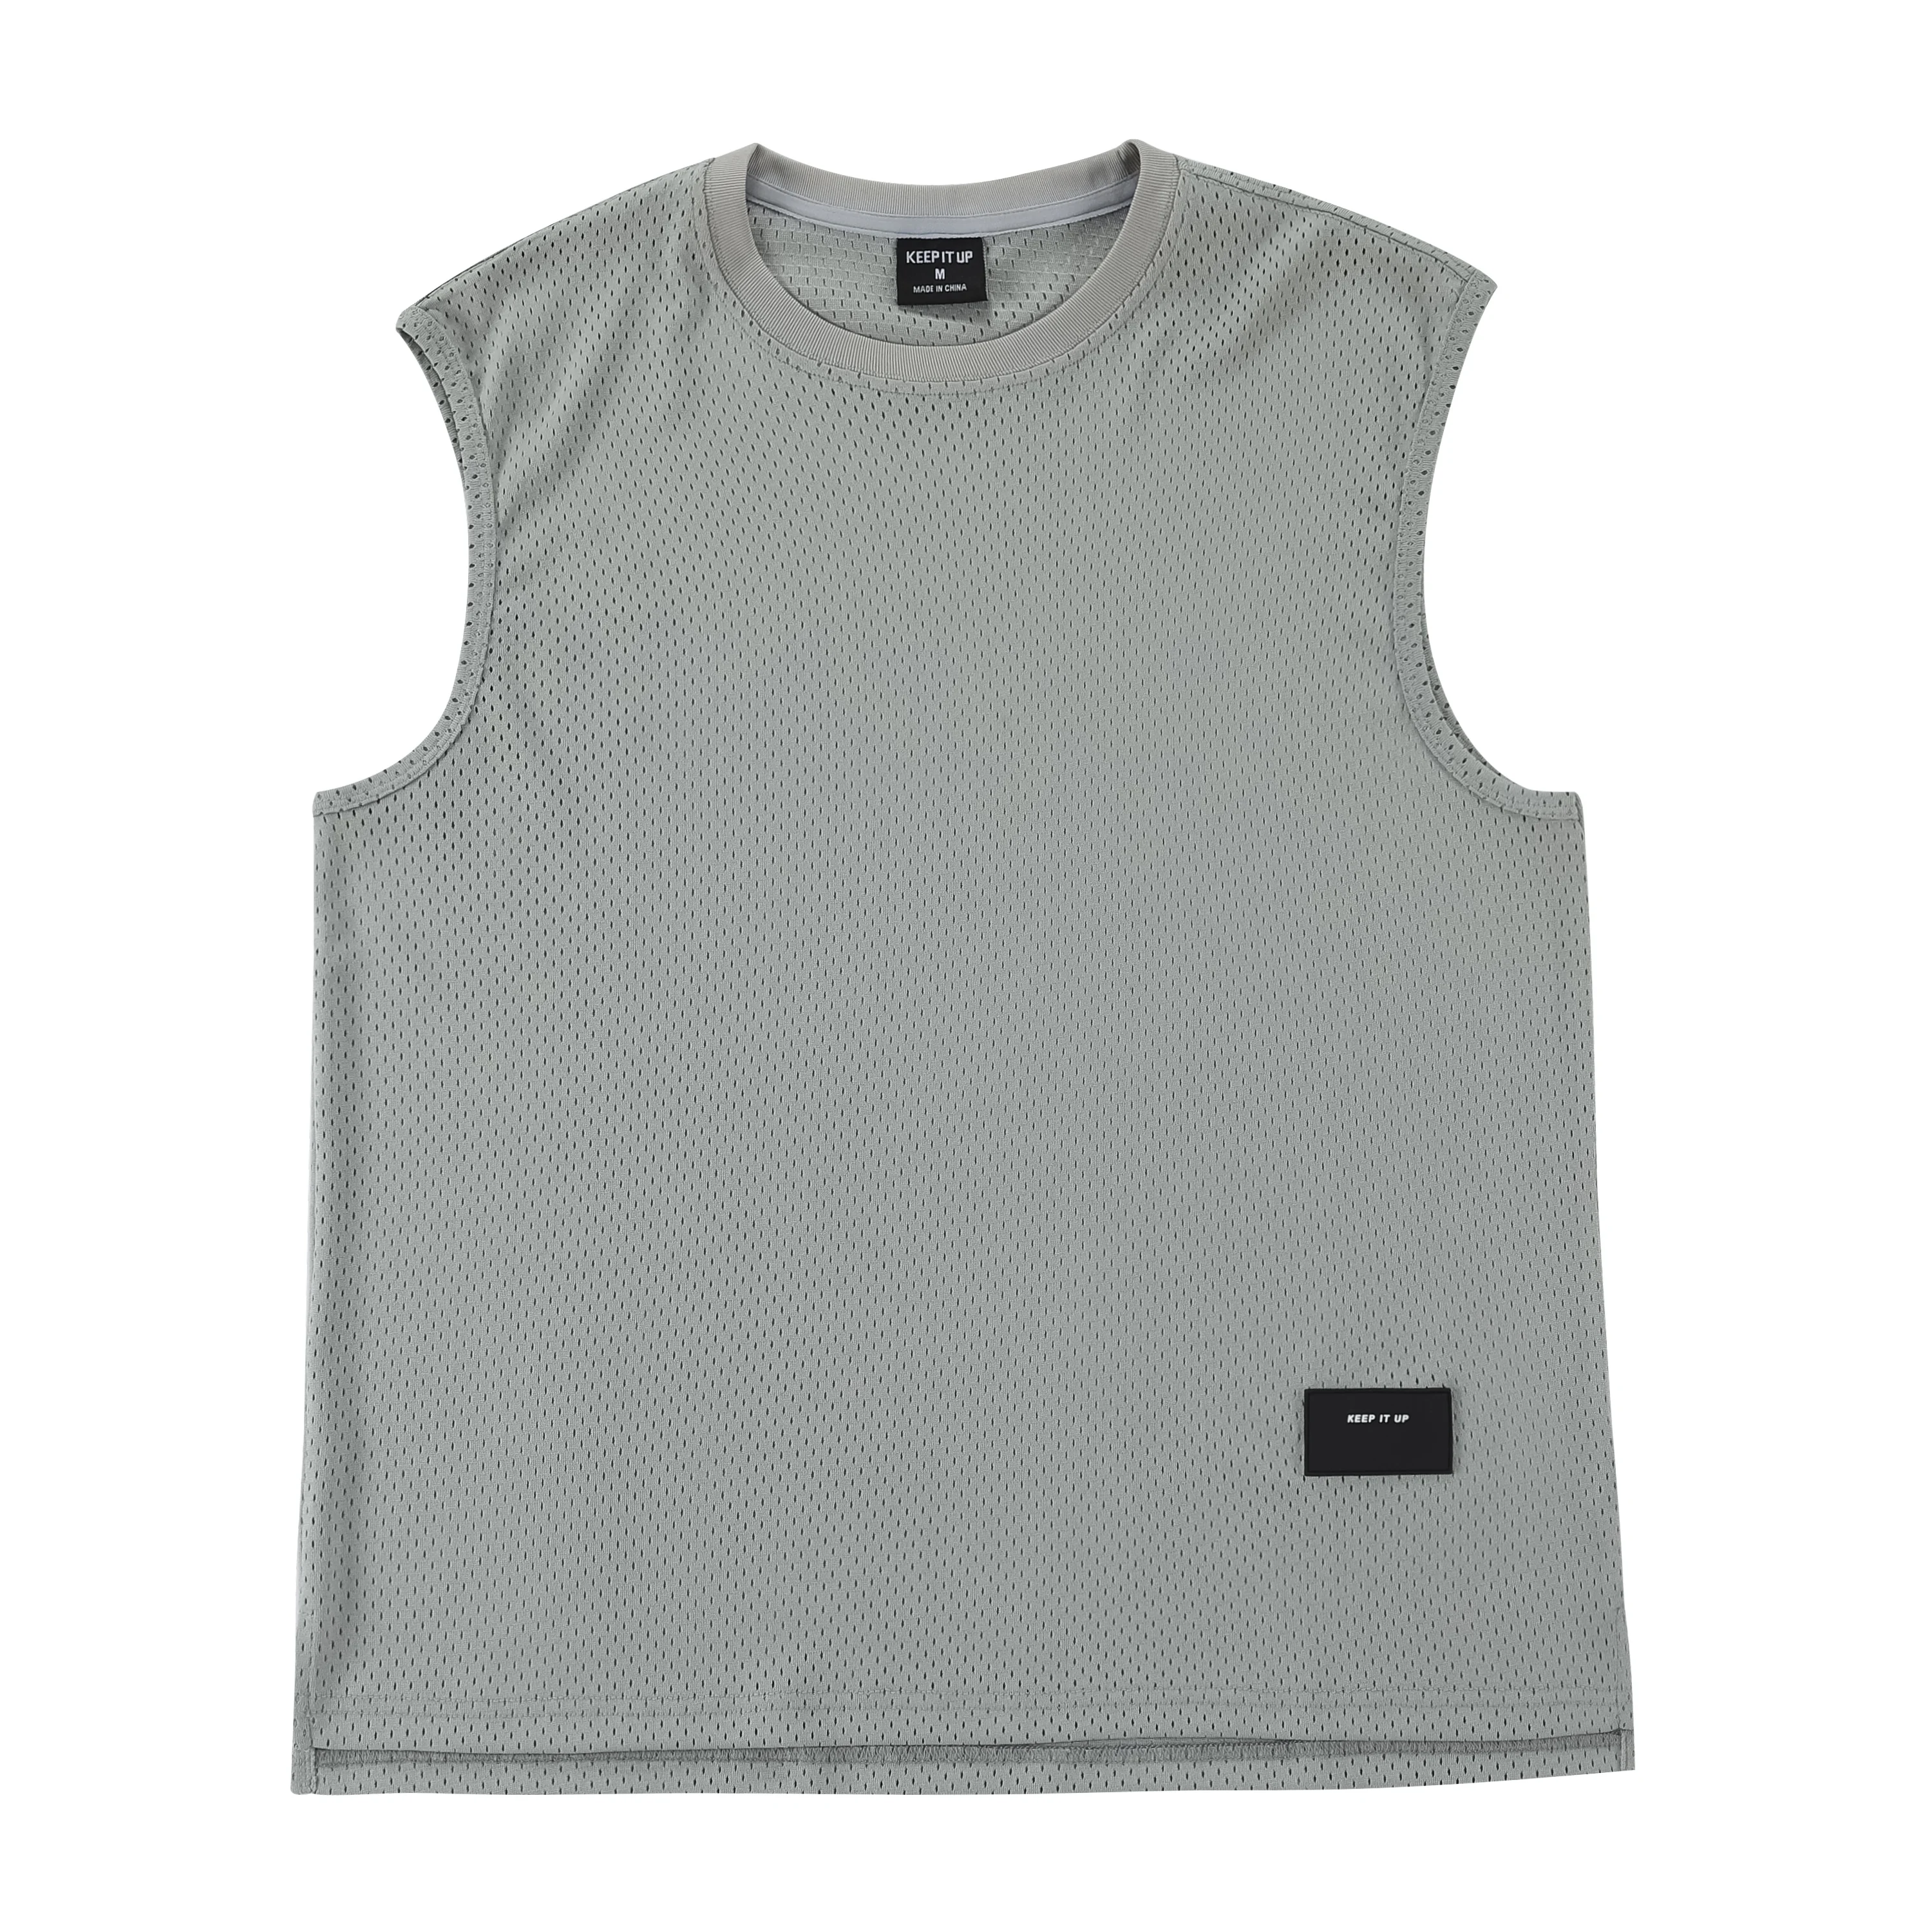 

Men Mesh Vests Summer Thin Tank Top Quick Dry Sports Undershirt Bodybuilding Muscle Training Breathable Sleeveless T-Shirts